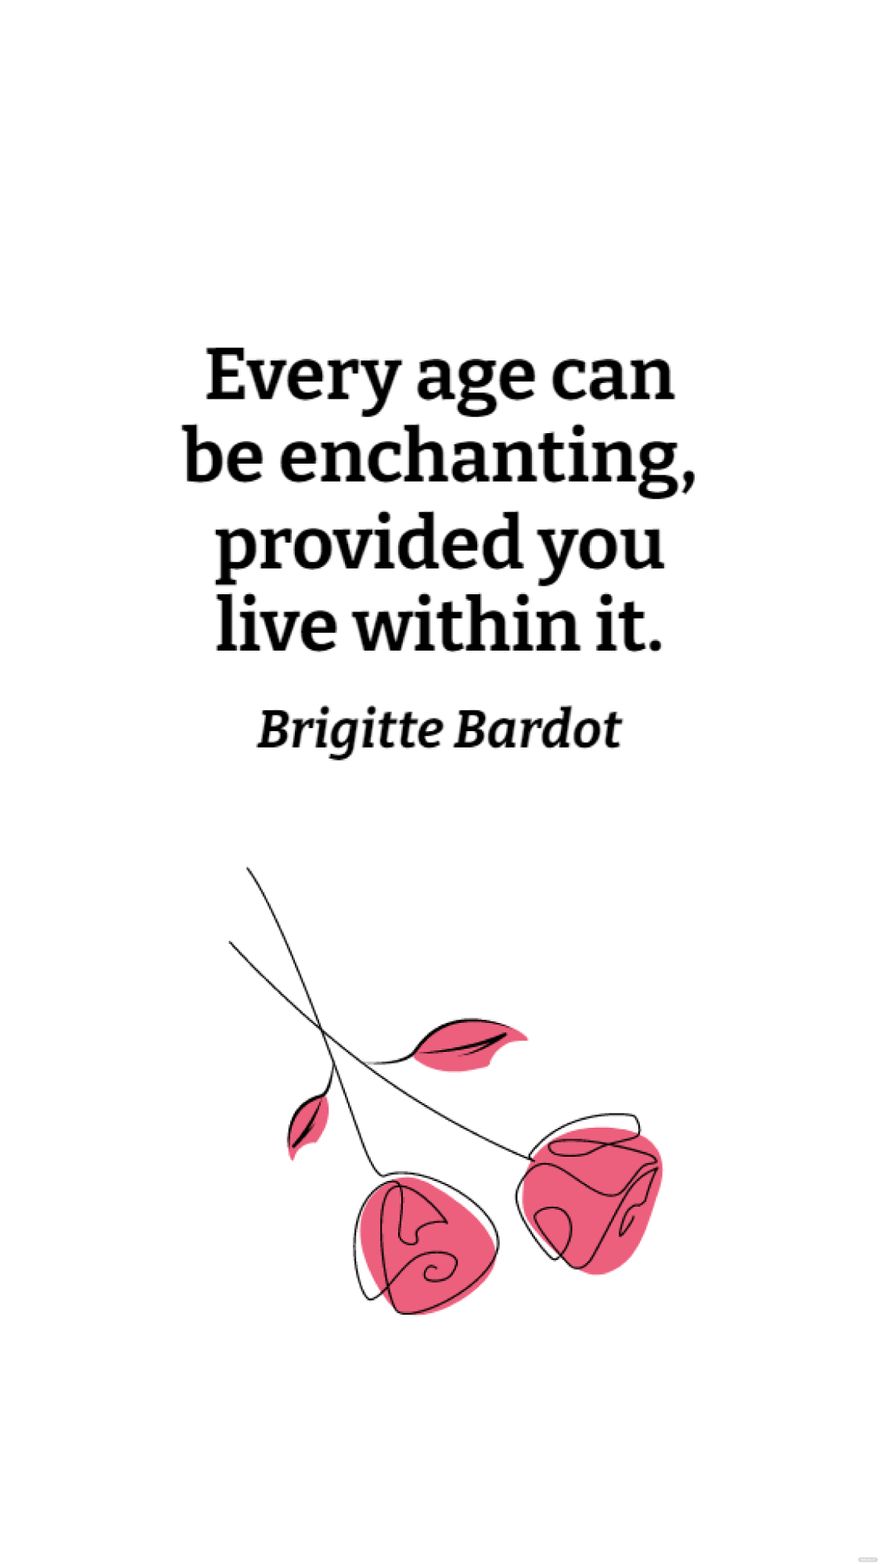 Free Brigitte Bardot - Every age can be enchanting, provided you live within it.